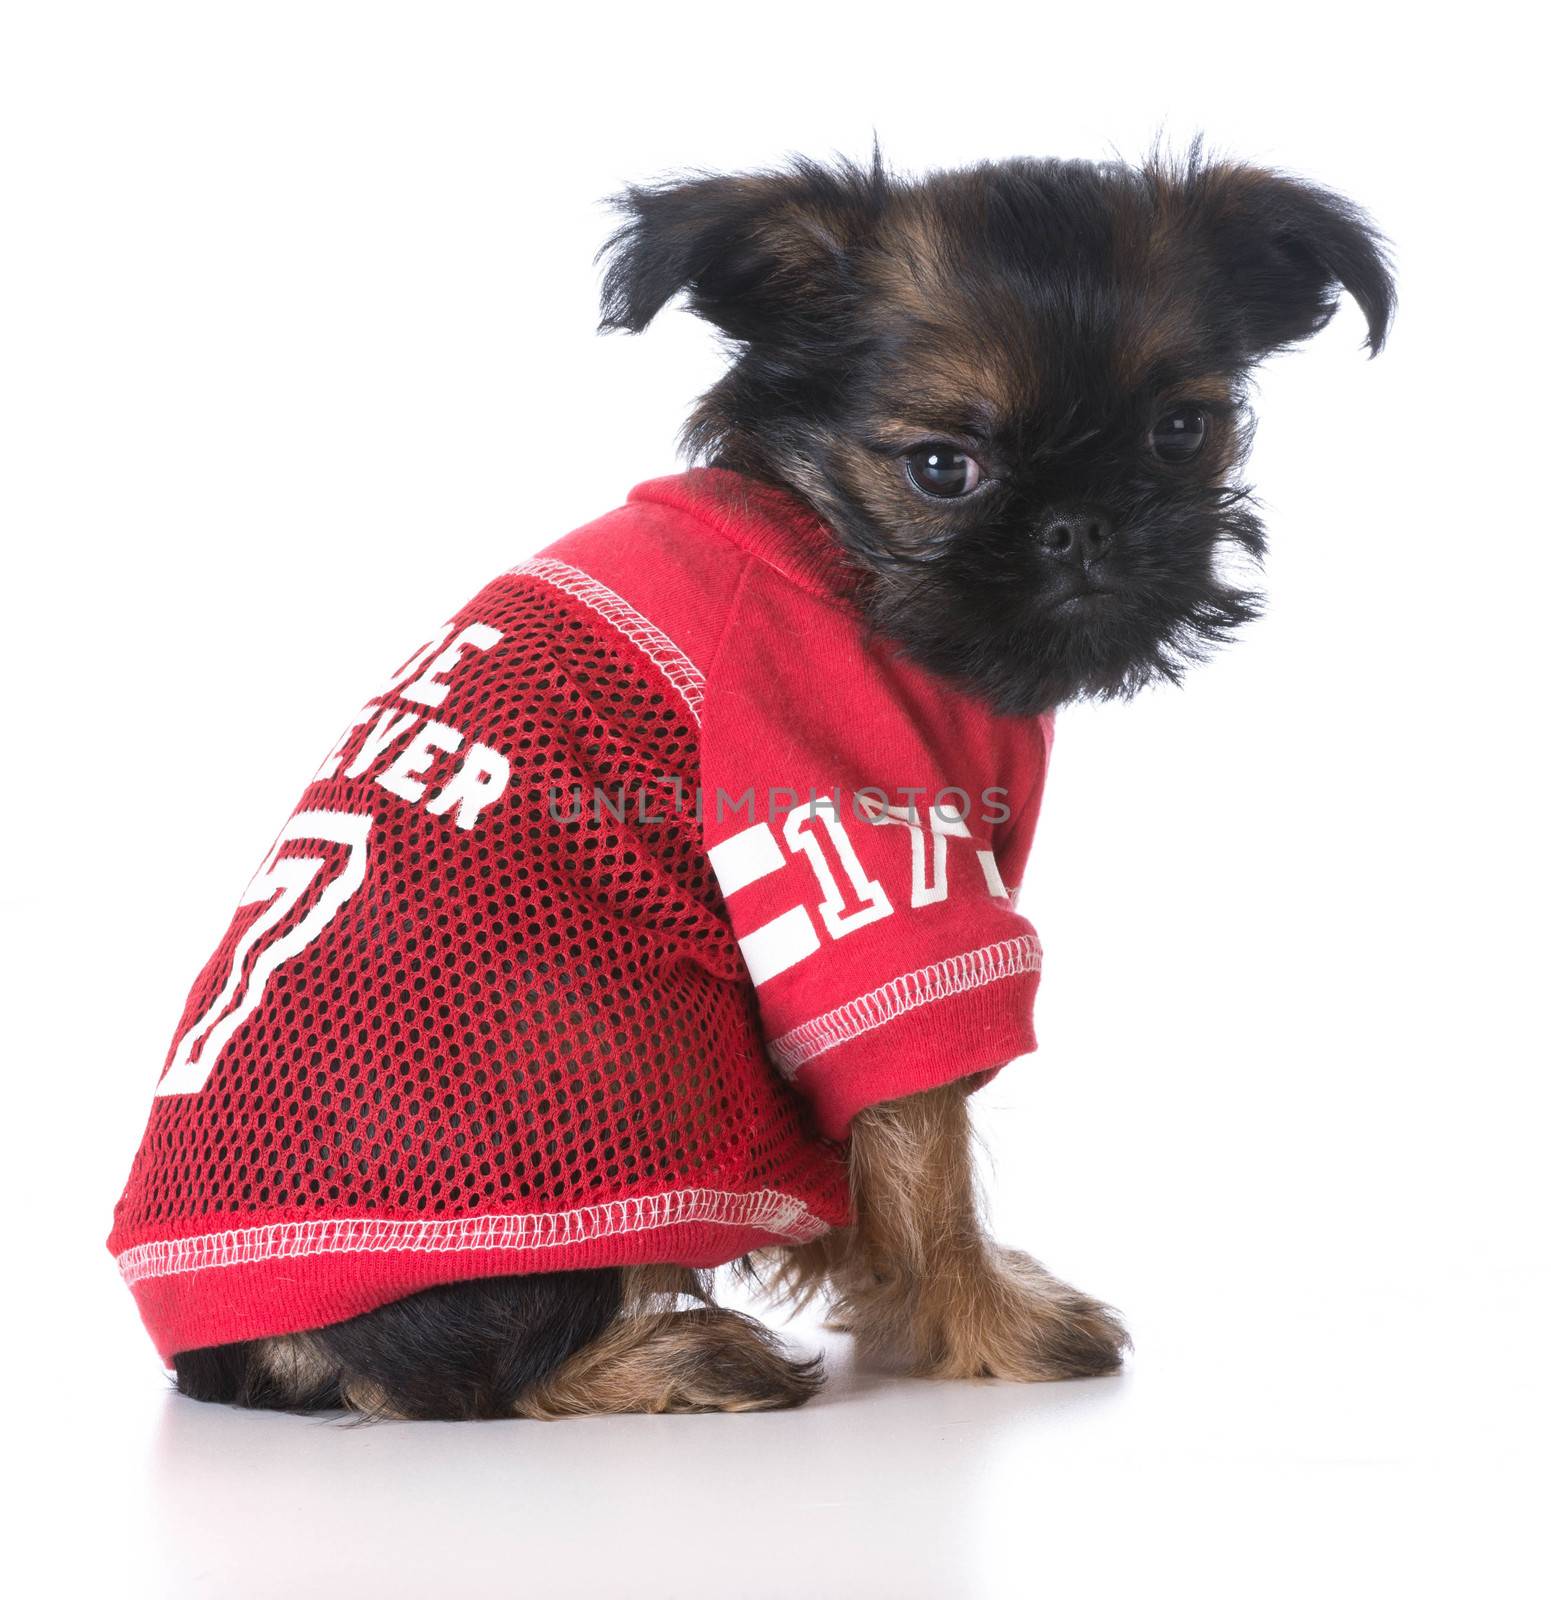 young brussels griffon puppy wearing red sports jersey on white background